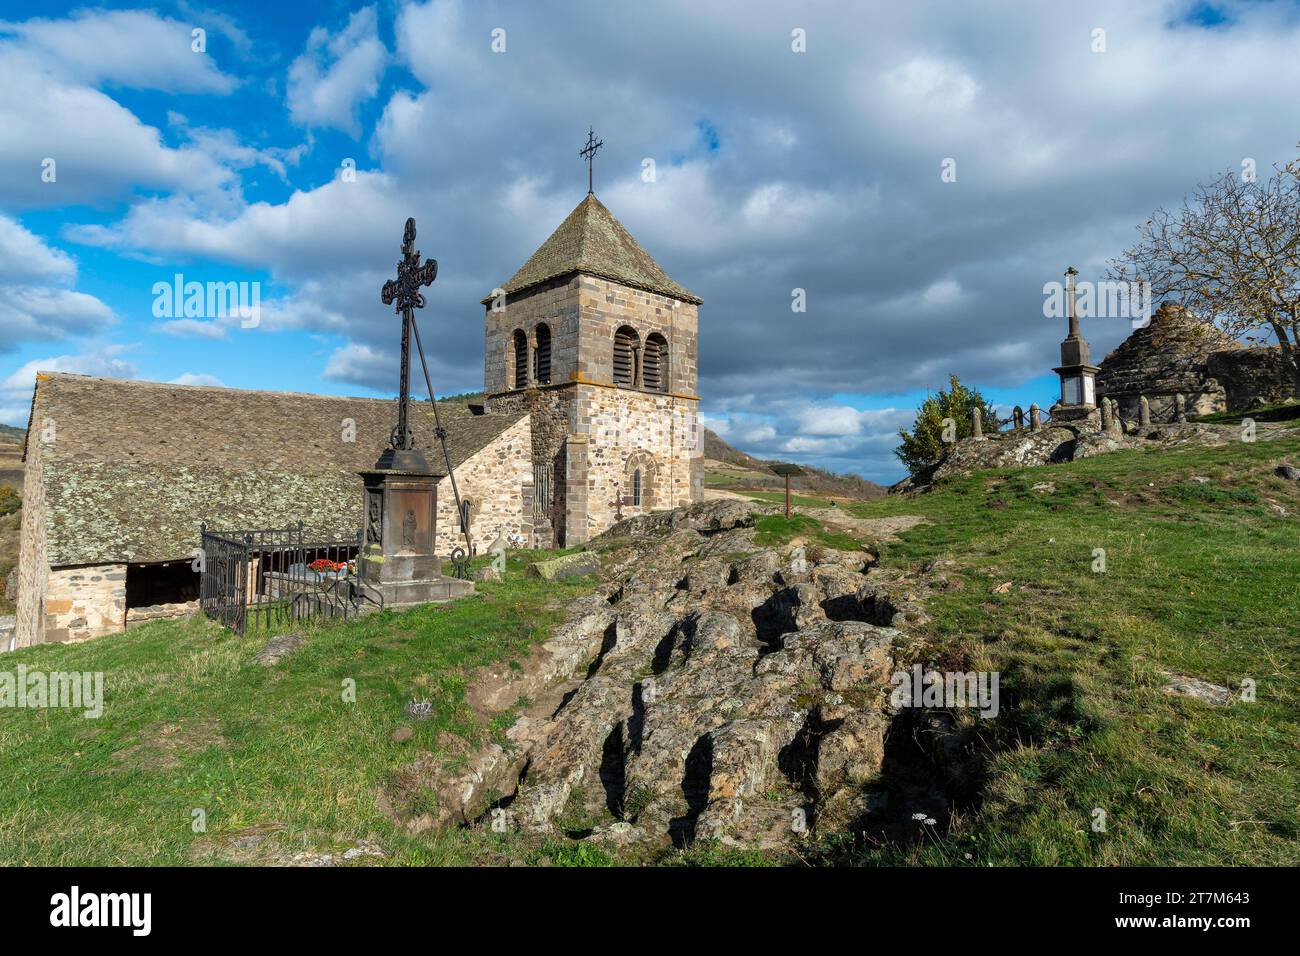 Saint Floret, church of the Chastel and medievals tombs, Puy de Dome departement, Auvergne Rhone Alpes, France Stock Photo